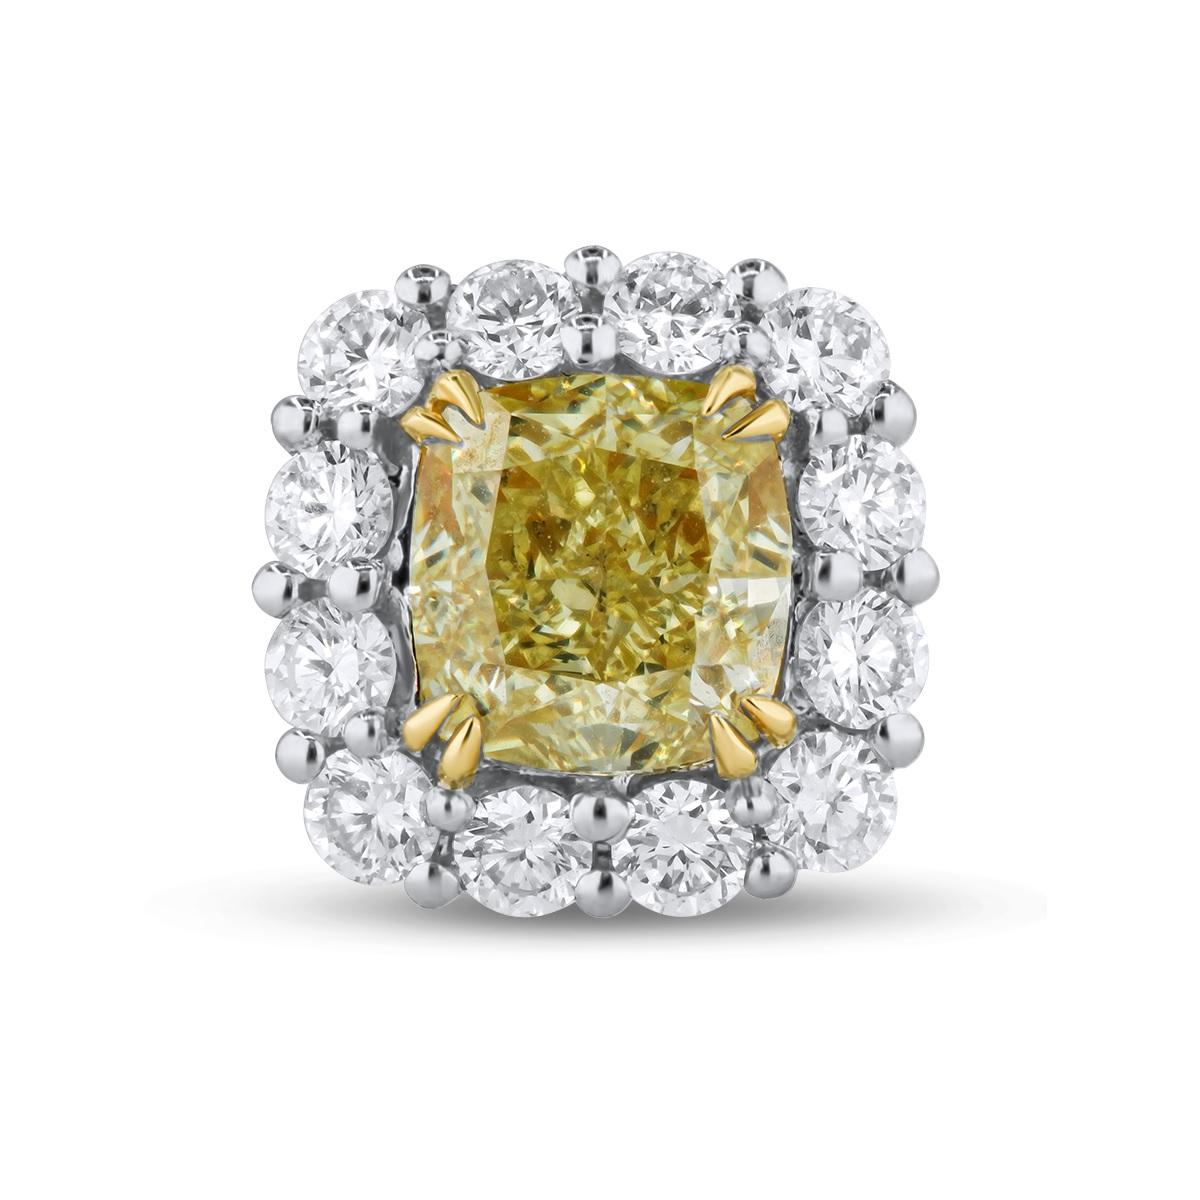 Experience the pinnacle of luxury with our extraordinary yellow cushion diamond earrings. These exceptional jewels boast a central GIA Certified yellow diamond that radiates warmth and brilliance, cradled by a glistening halo of white diamonds. The